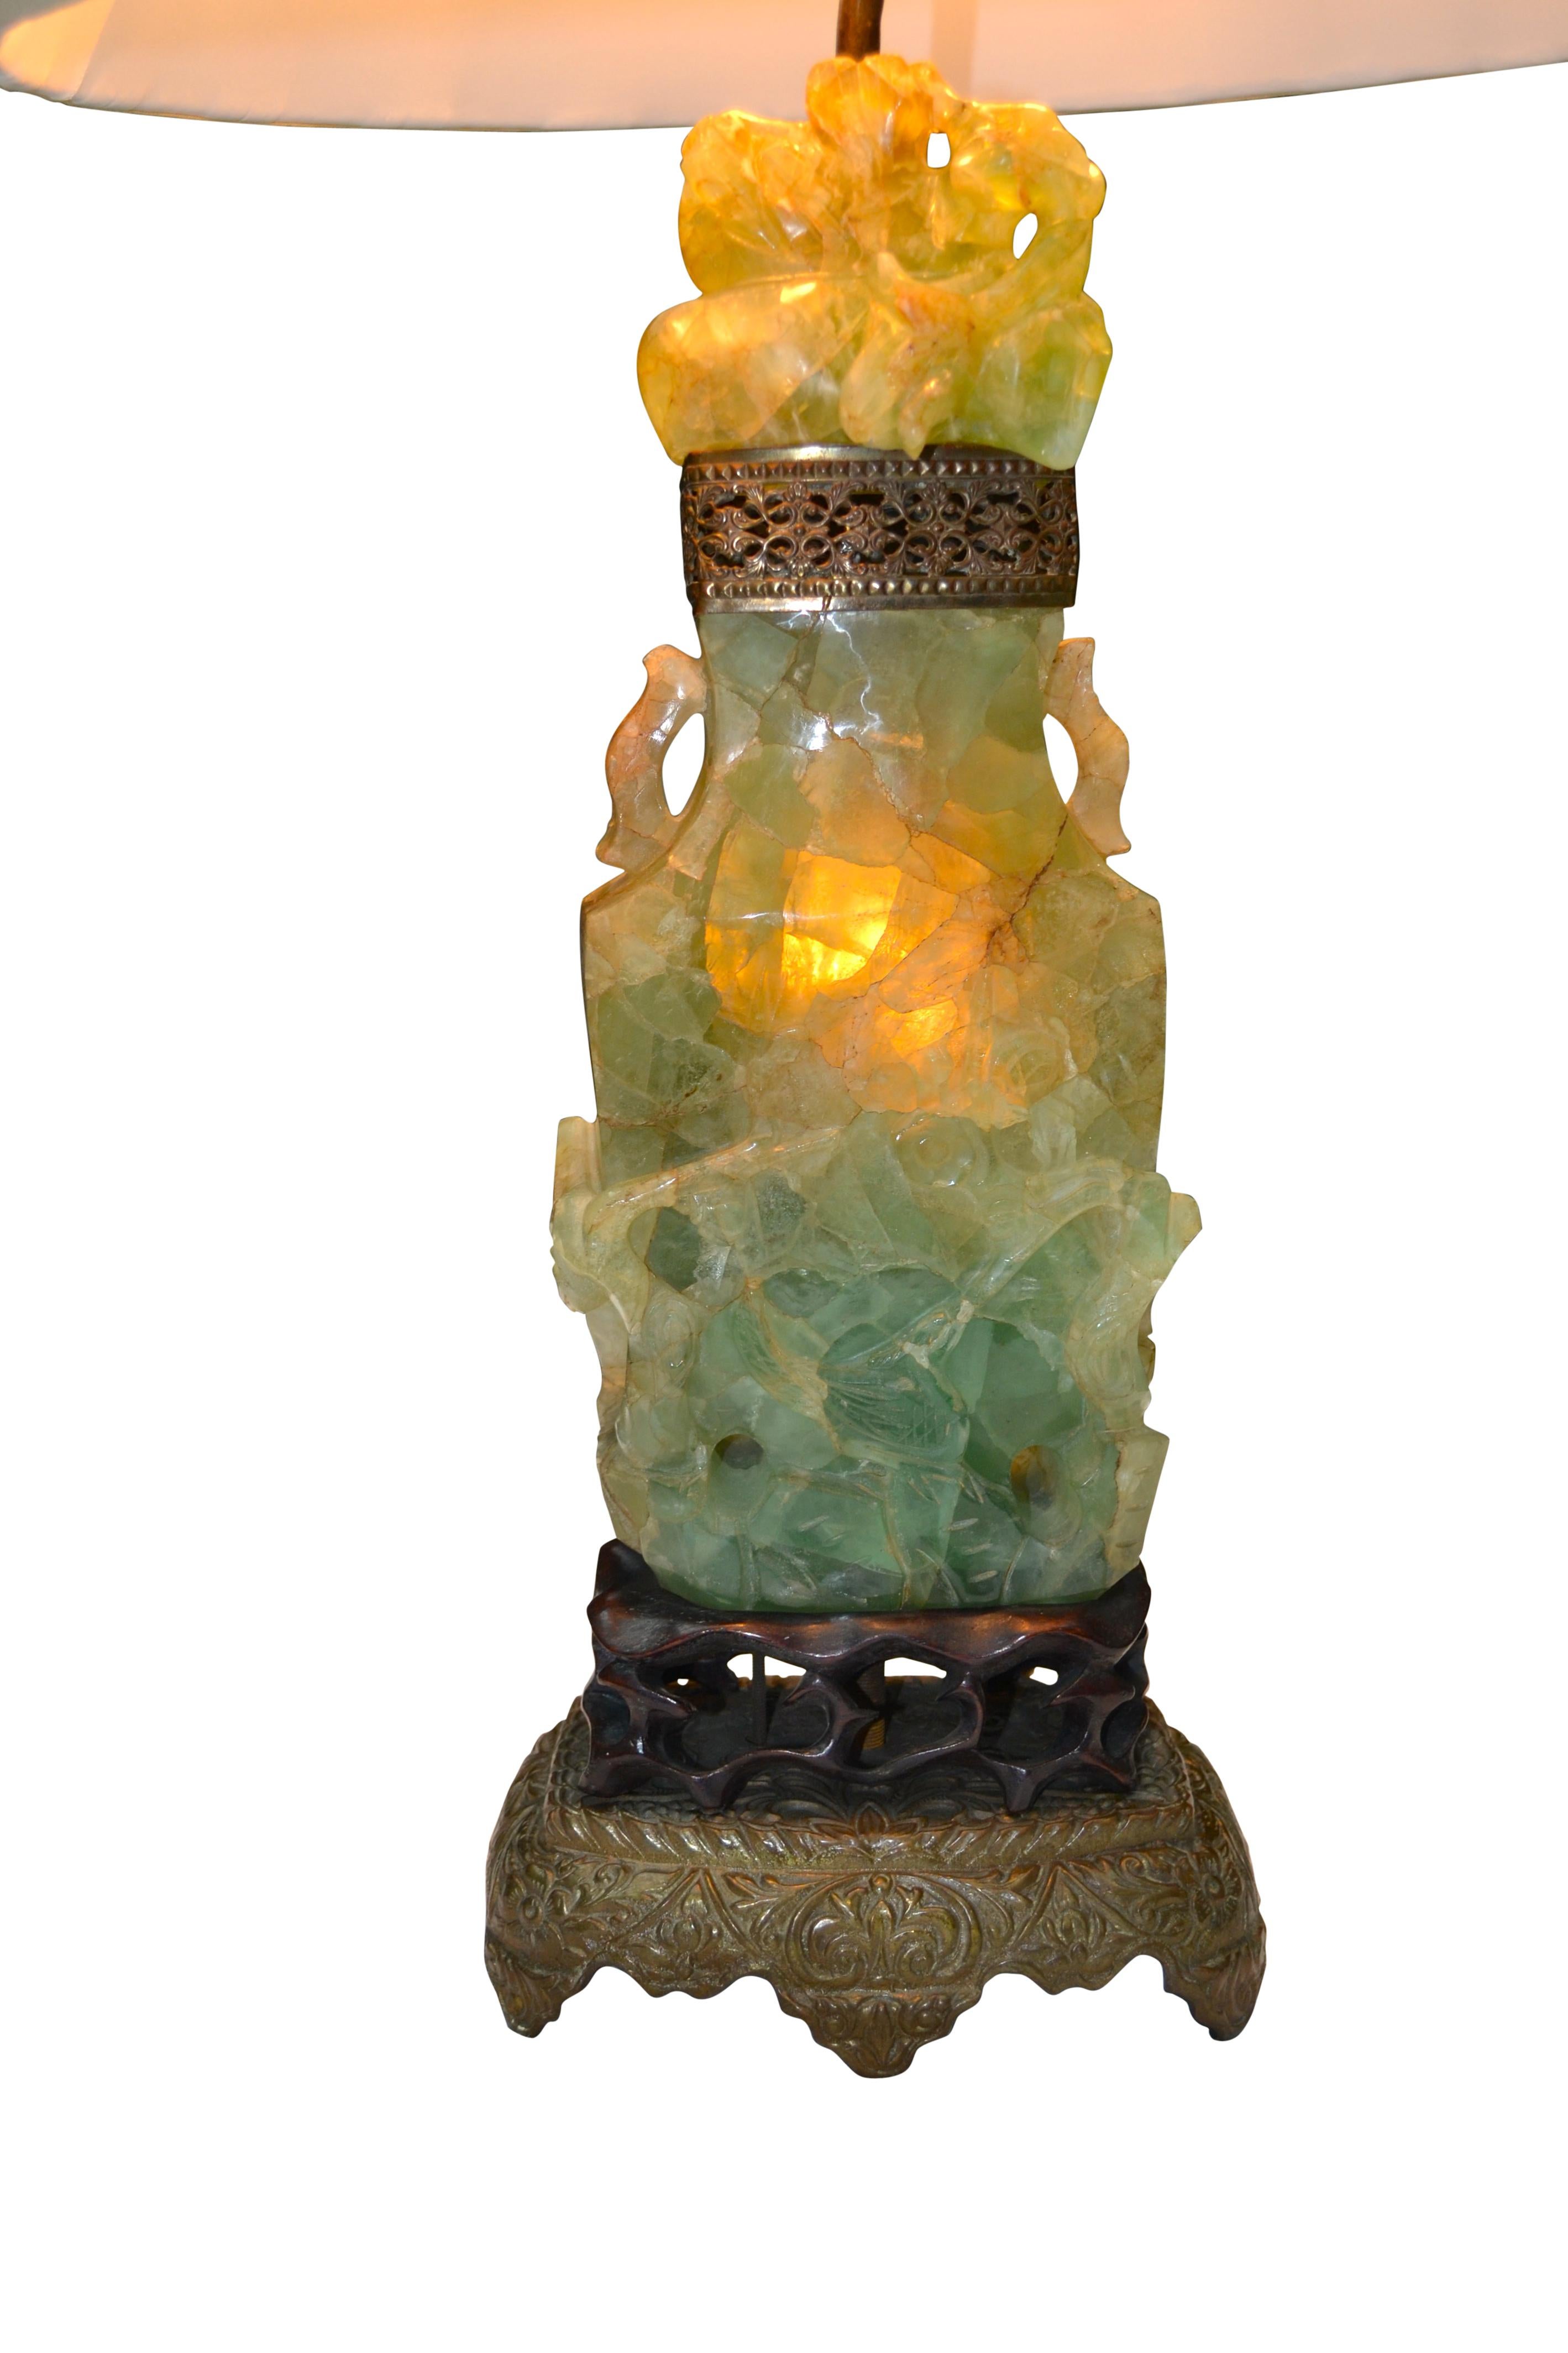 A Chinese carved stone lamp mounted on a brass and a carved rosewood base. The carved stone is often referred to as Jadeite or Quartz but is in fact from the fluorite family. This lamp base was carved in China and exported to the United States